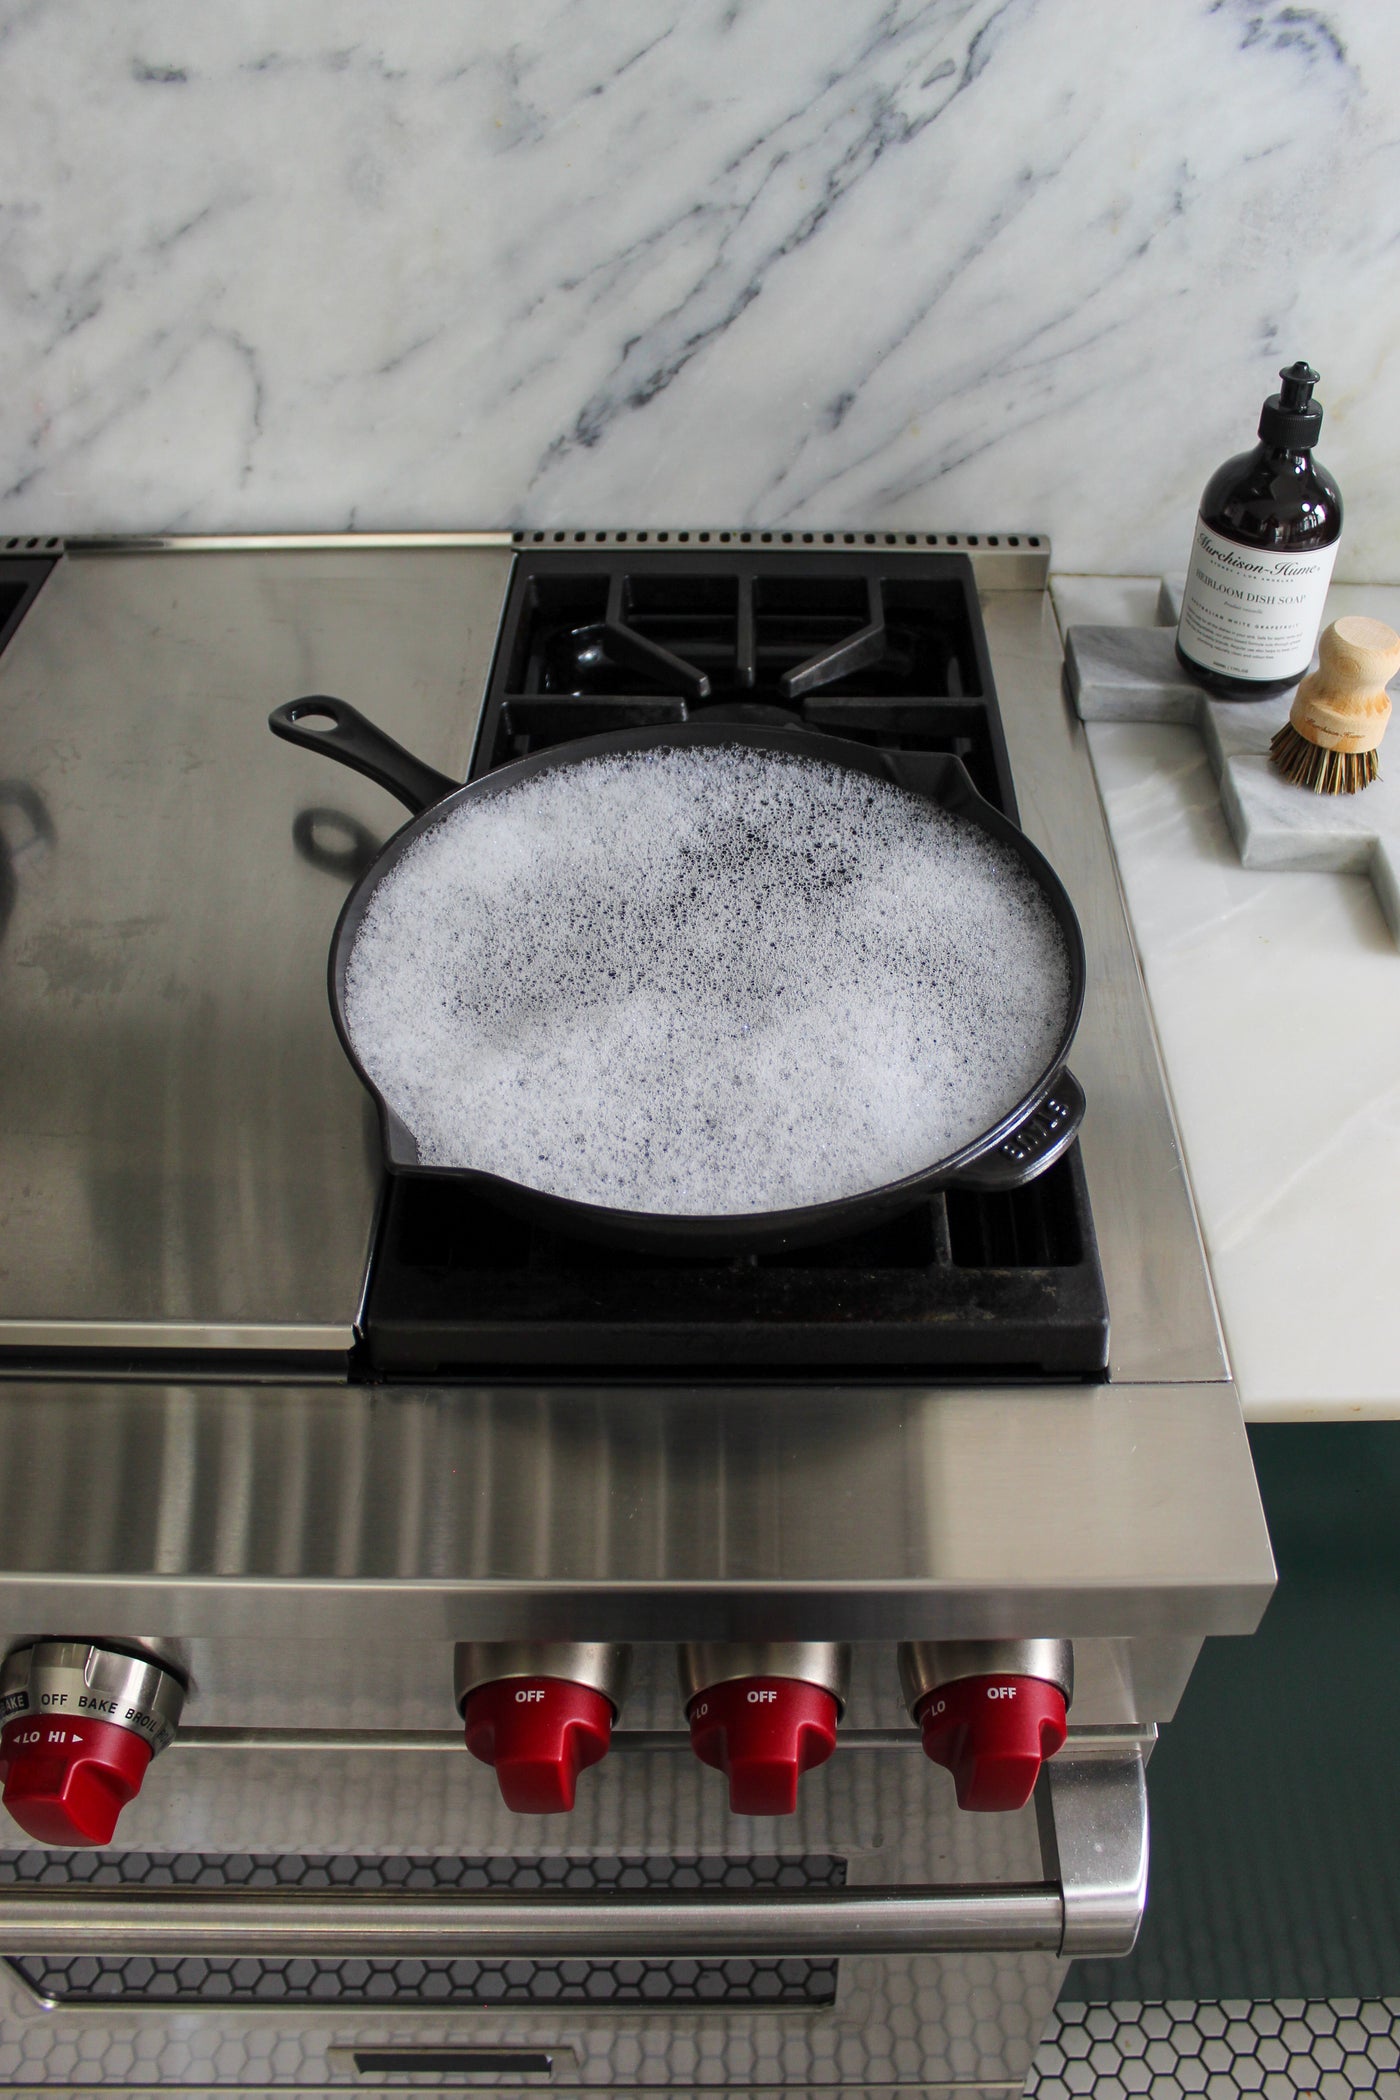 Cast Iron Pans: Cleaning & Care